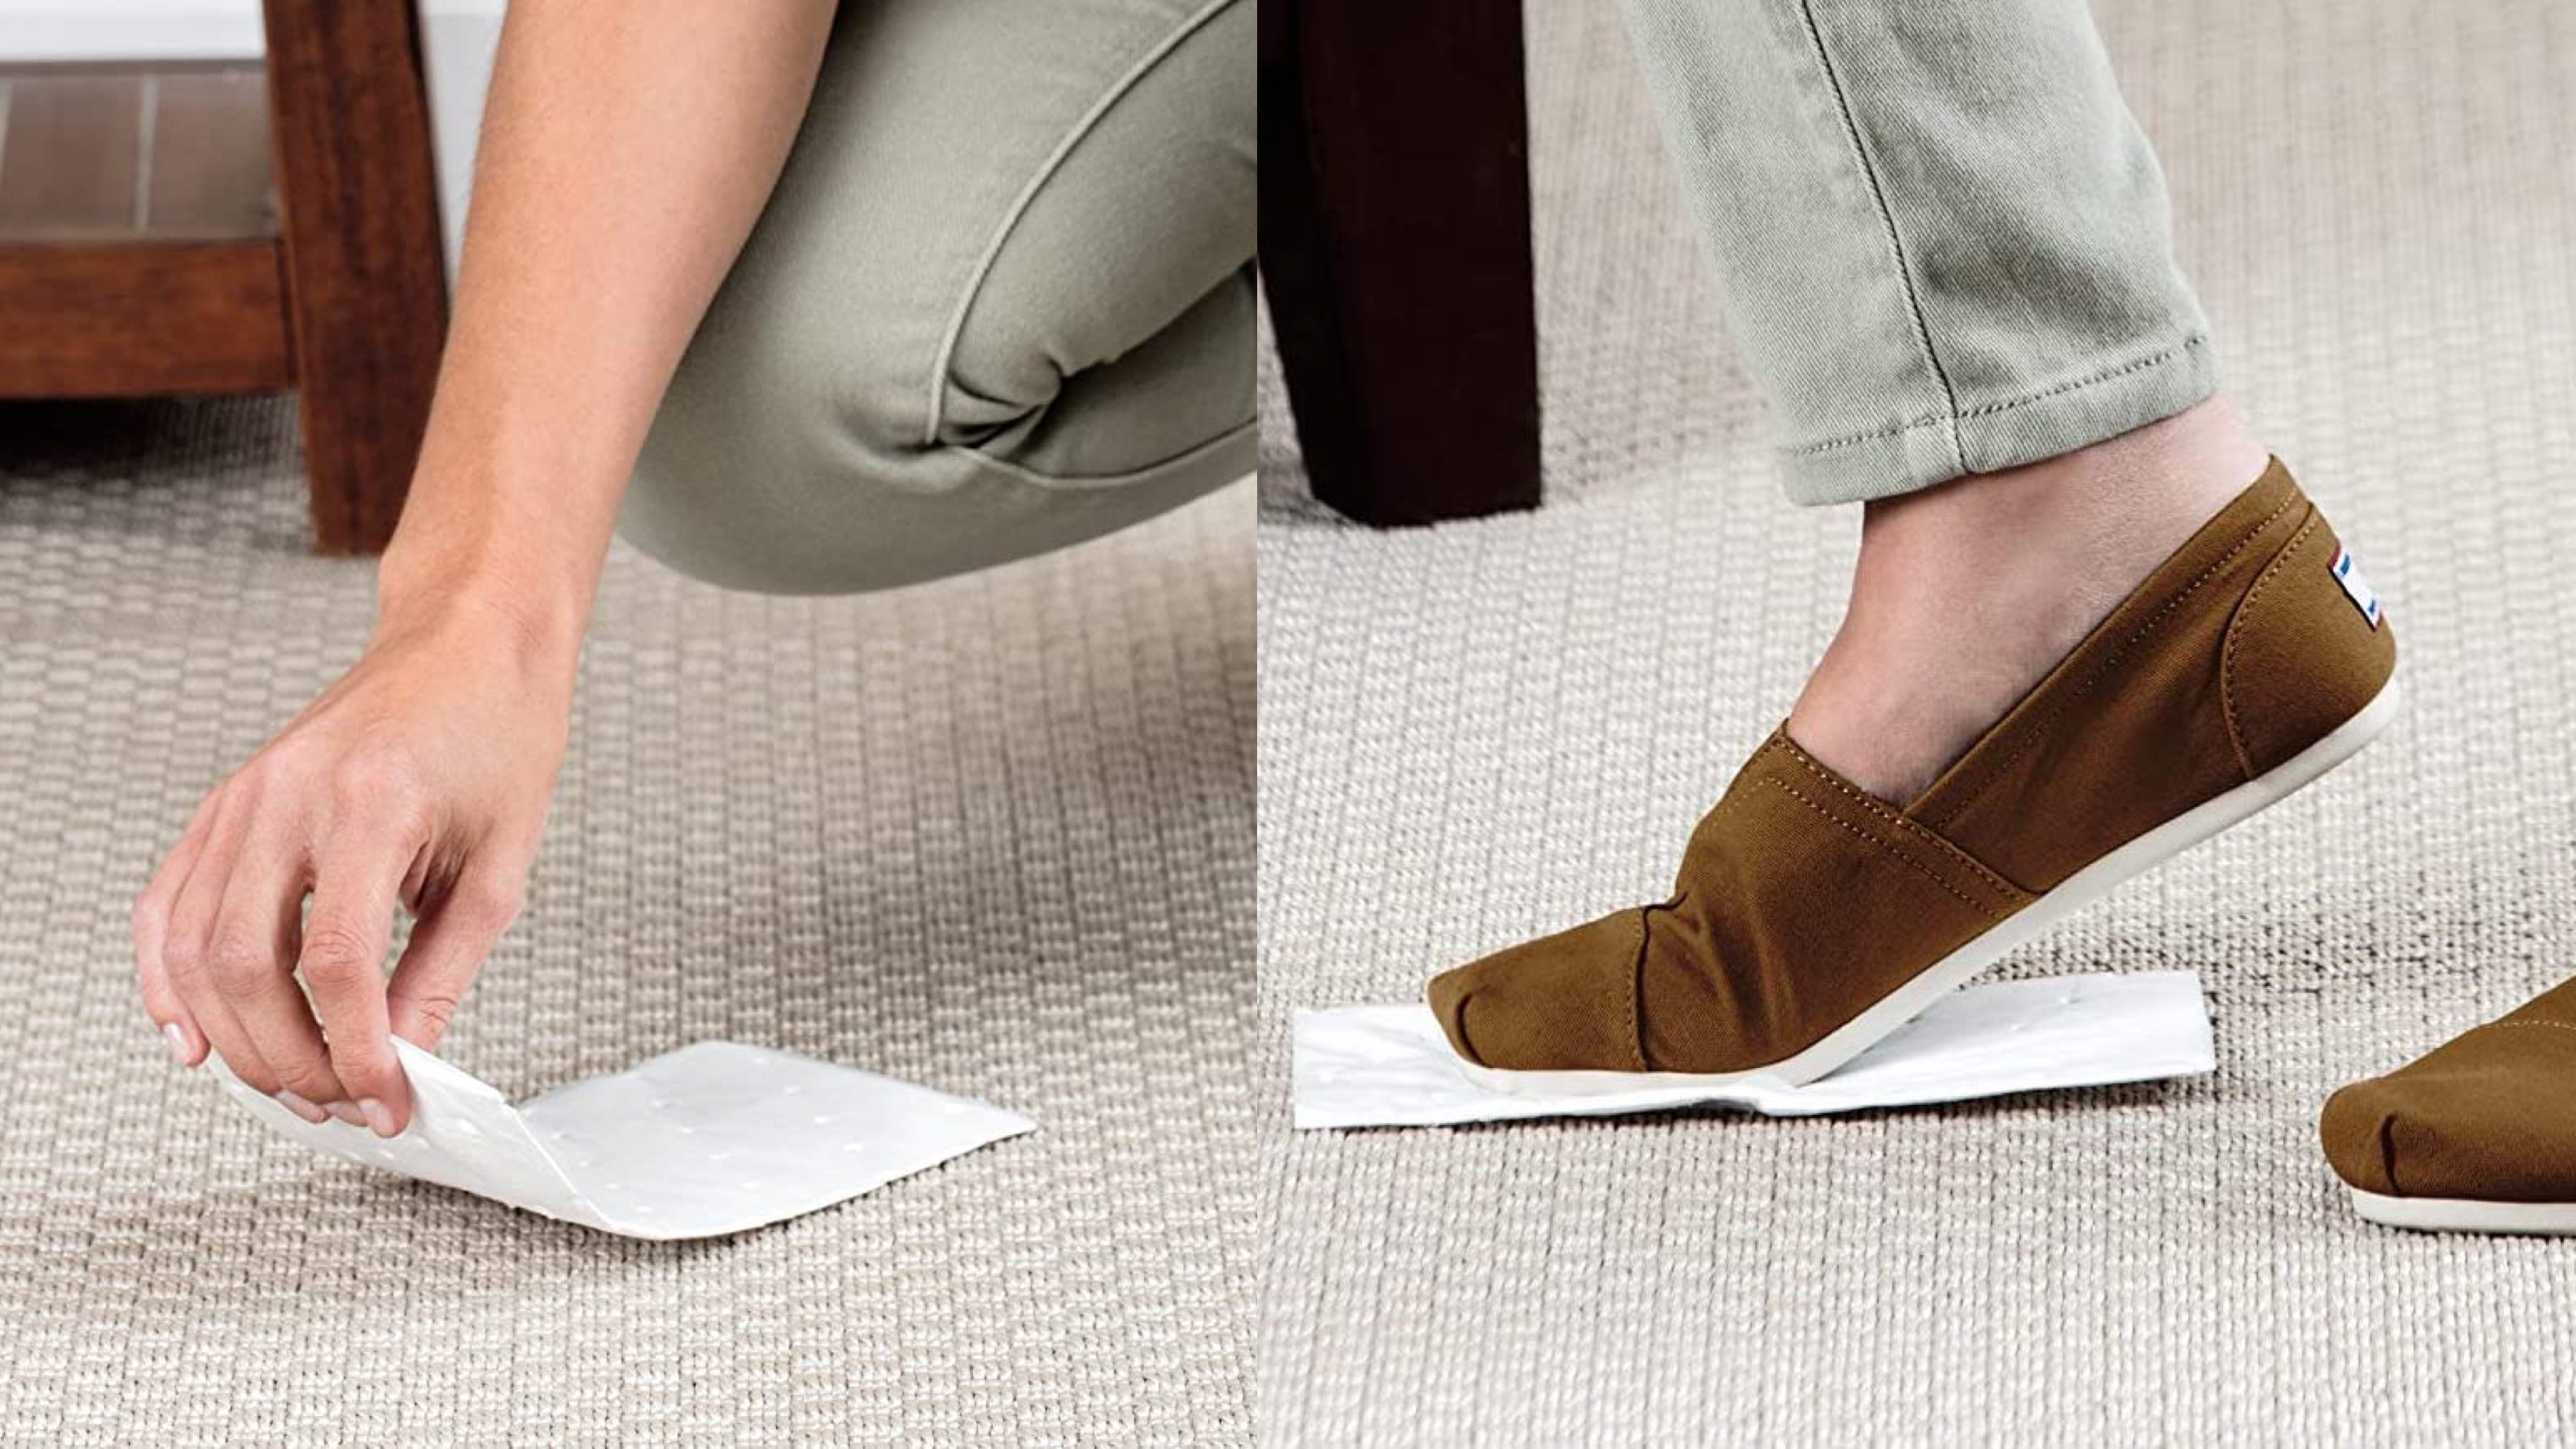 absorbent pads that can clean up urine 